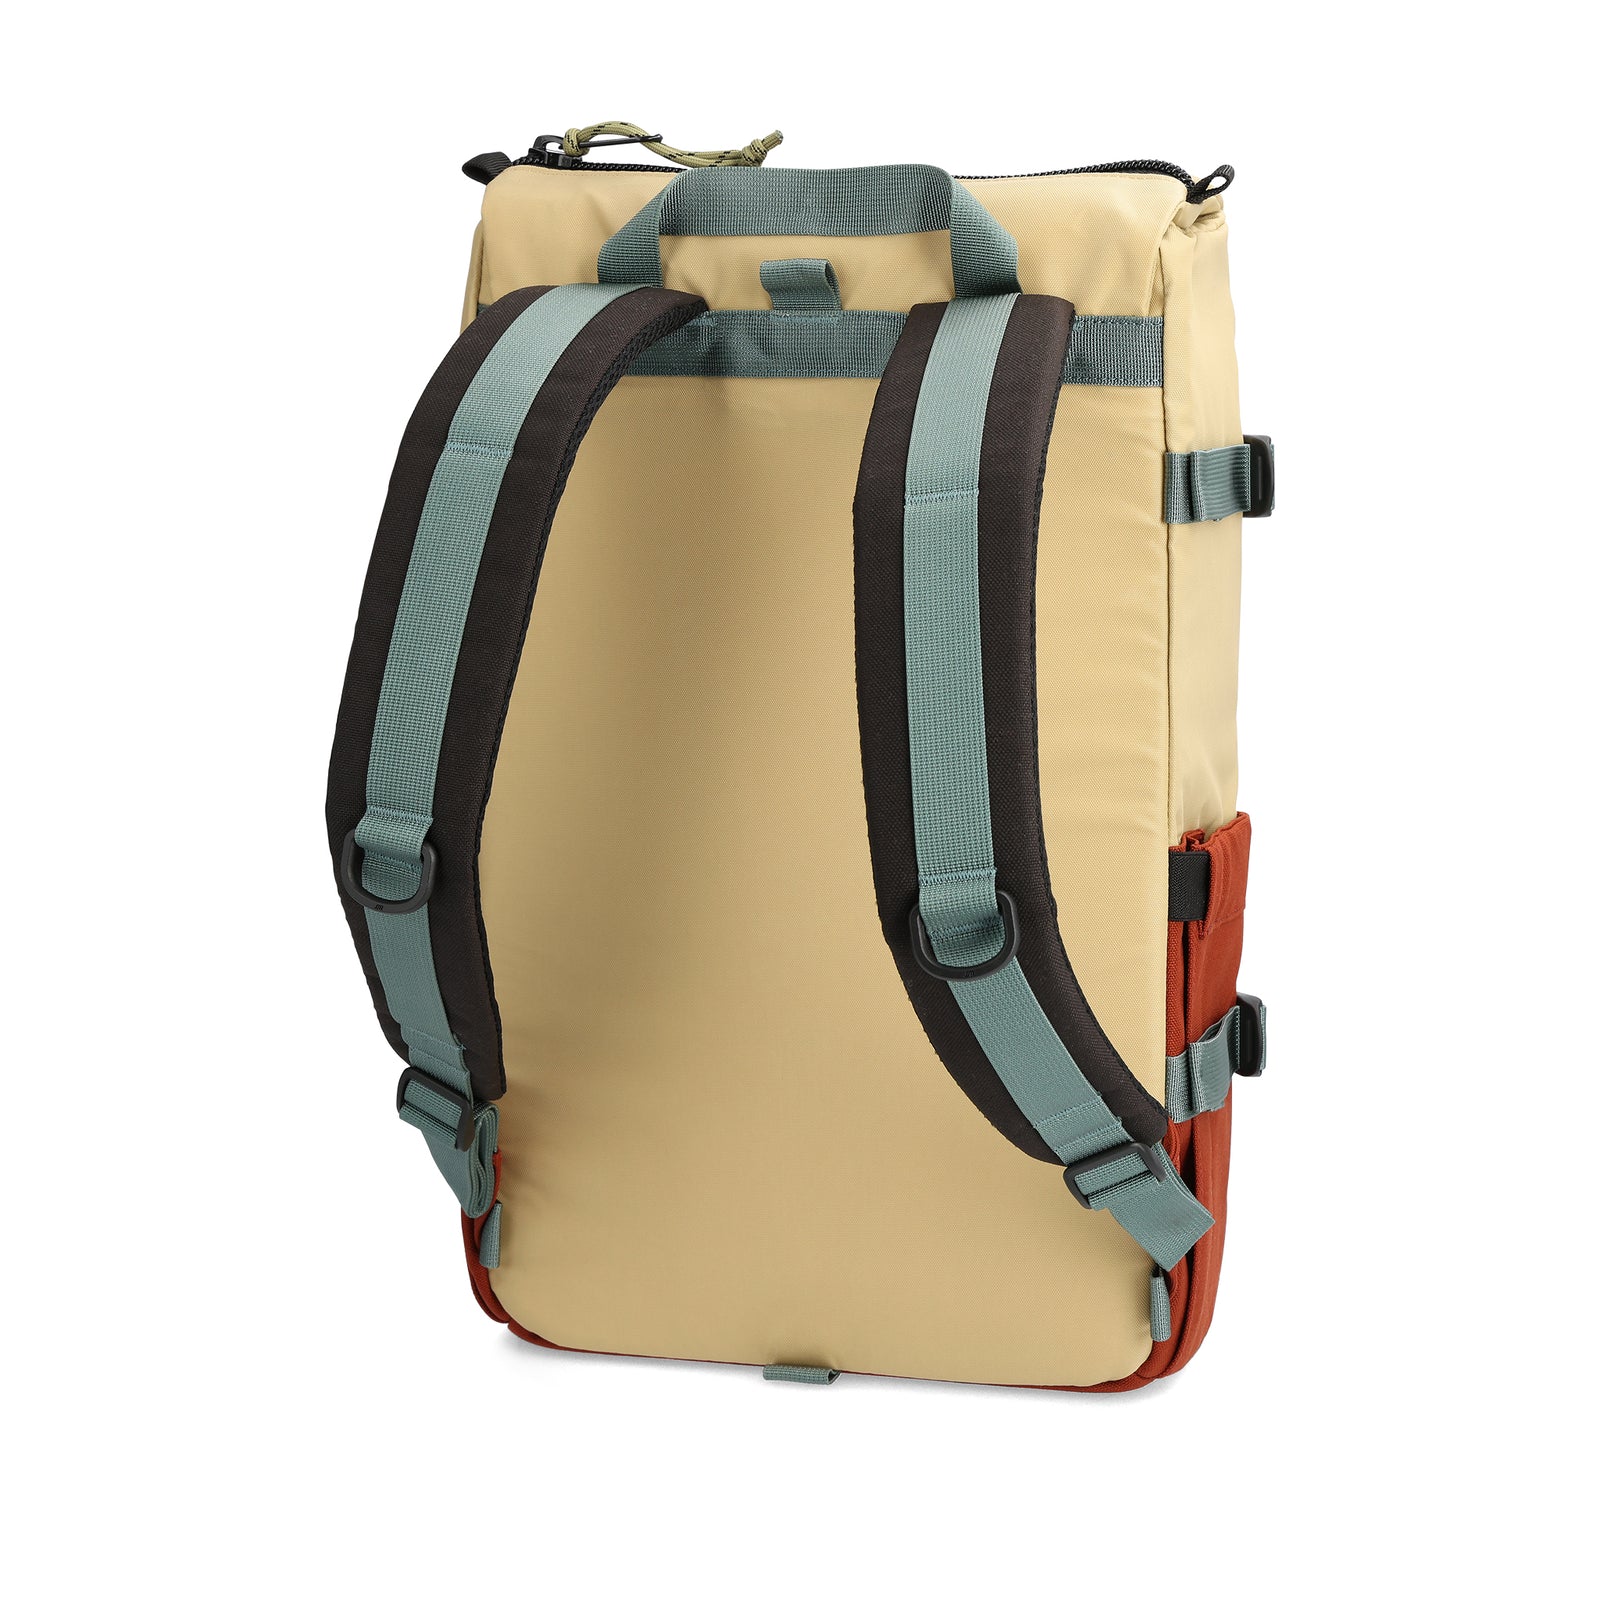 Back View of Topo Designs Rover Pack Classic in "Sahara / Fire Brick"